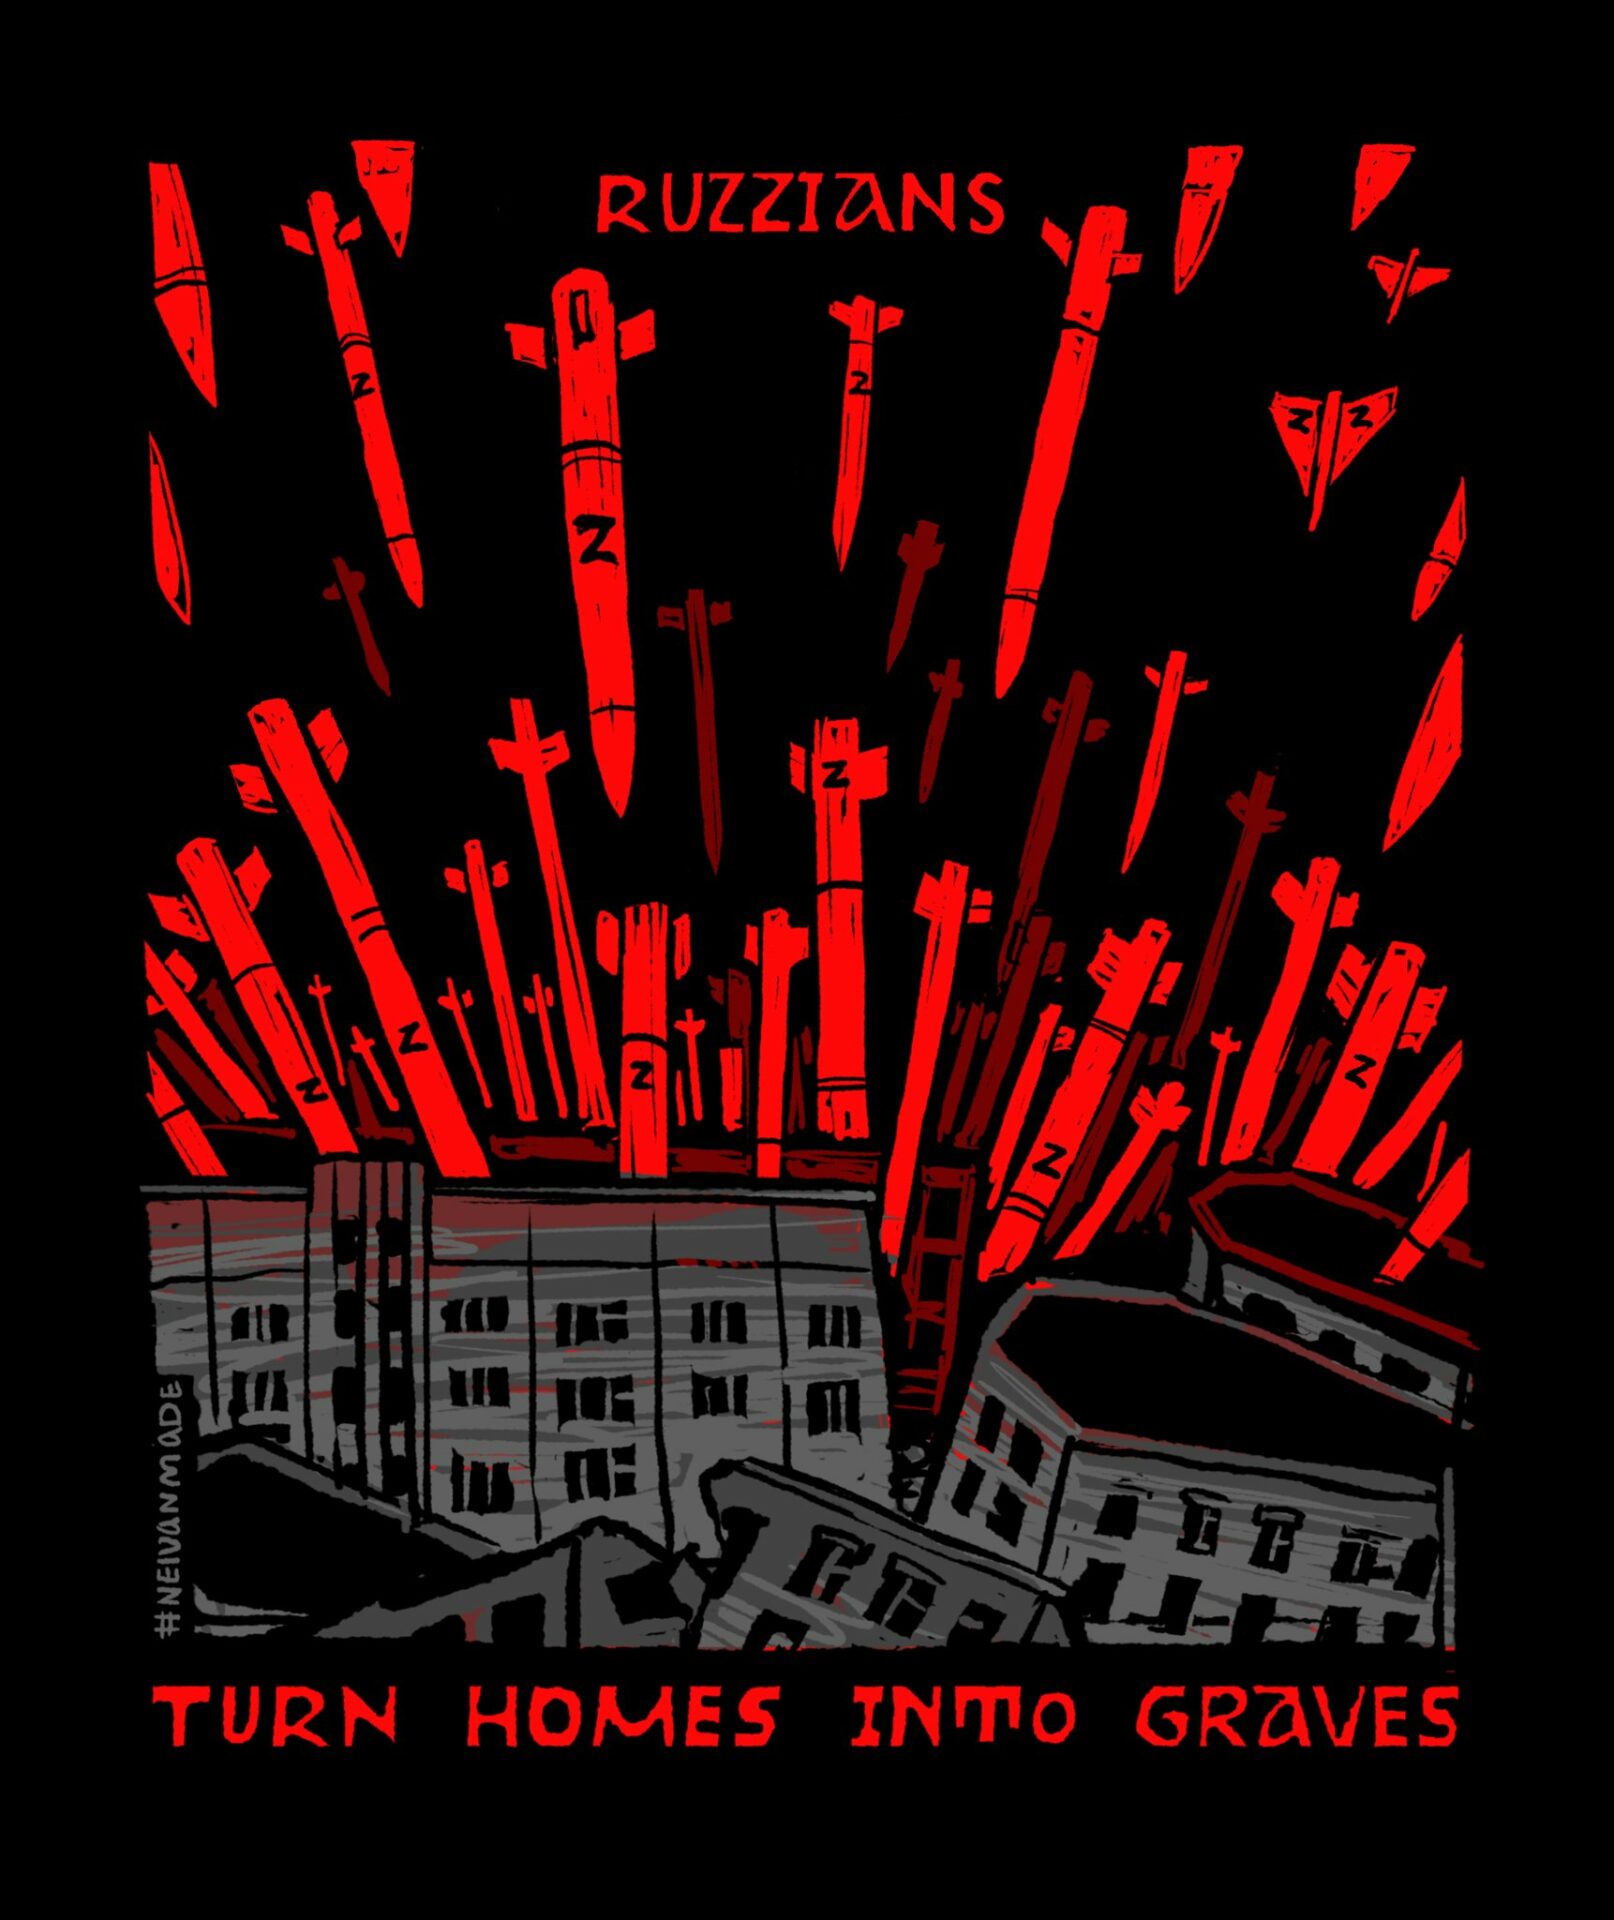 Screen shot of new artwork by NEIVANMADE. The background is black. In the bottom foreground are grey Ukrainian homes and apartment buildings being bombarded by red Russian missiles with the Special Military Operation "Z" symbol on them. Above the missiles, written in red is the word "Ruzzians". Below the buildings being attacked is the statement "Turns Homes Into Graves".